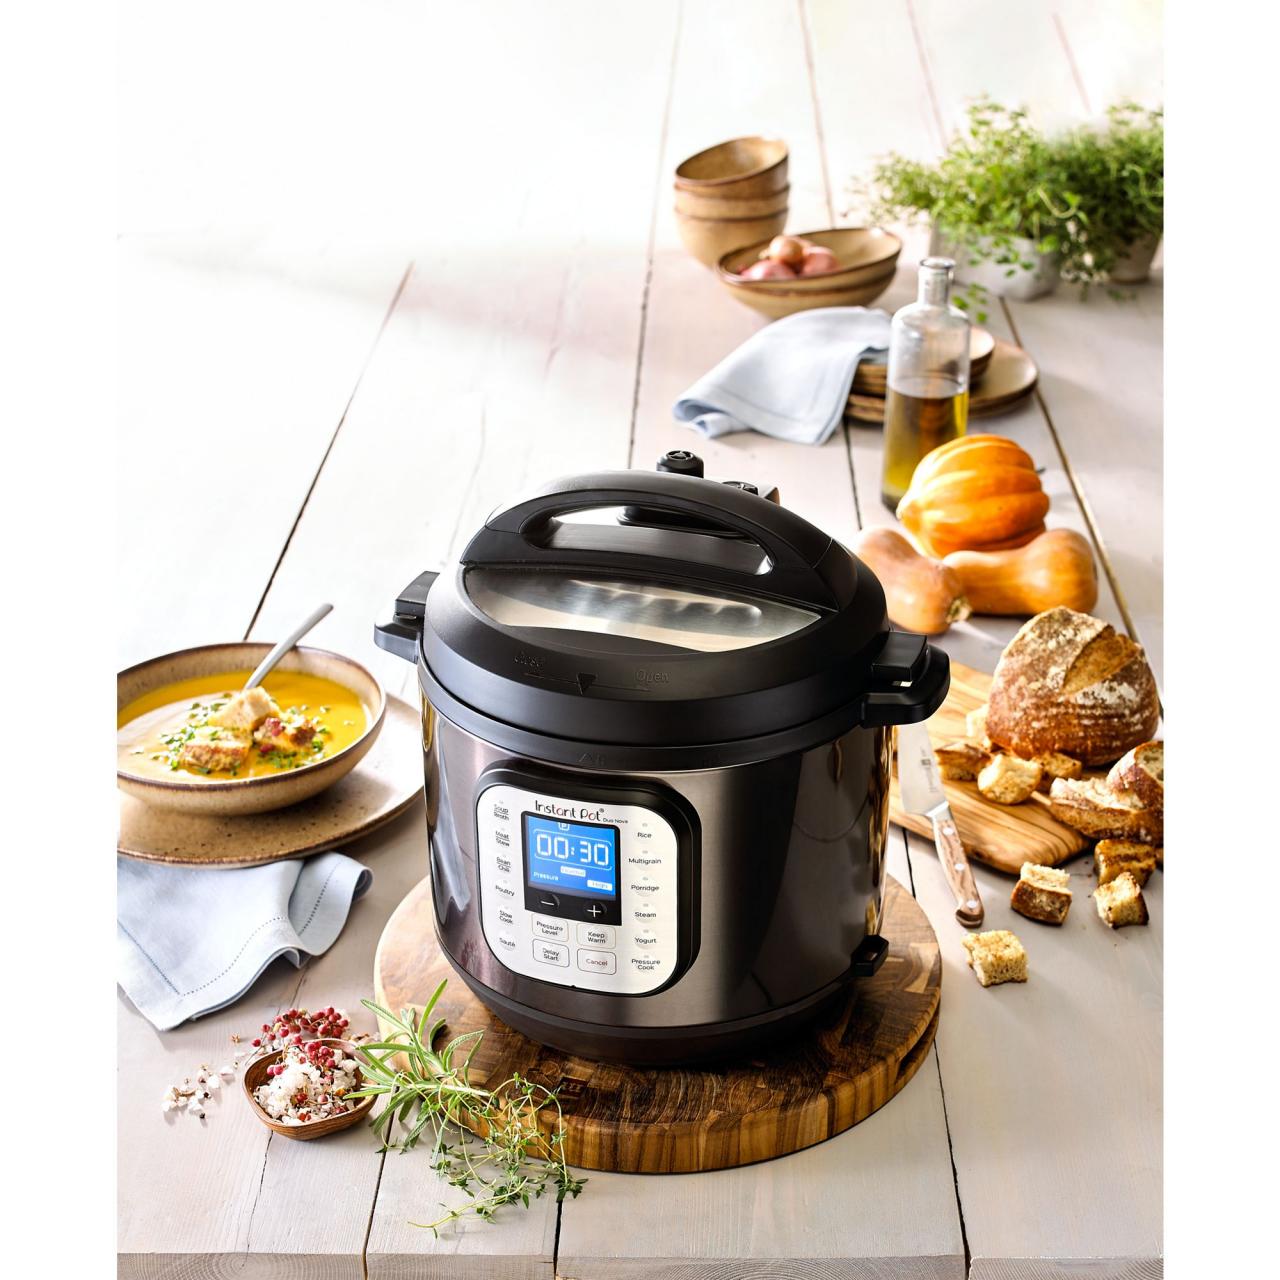 https://food.fnr.sndimg.com/content/dam/images/food/products/2020/3/30/rx_instant-pot-duo-nova-6-quart-7-in-1-one-touch-multi-cooker.jpeg.rend.hgtvcom.1280.1280.suffix/1585585928066.jpeg